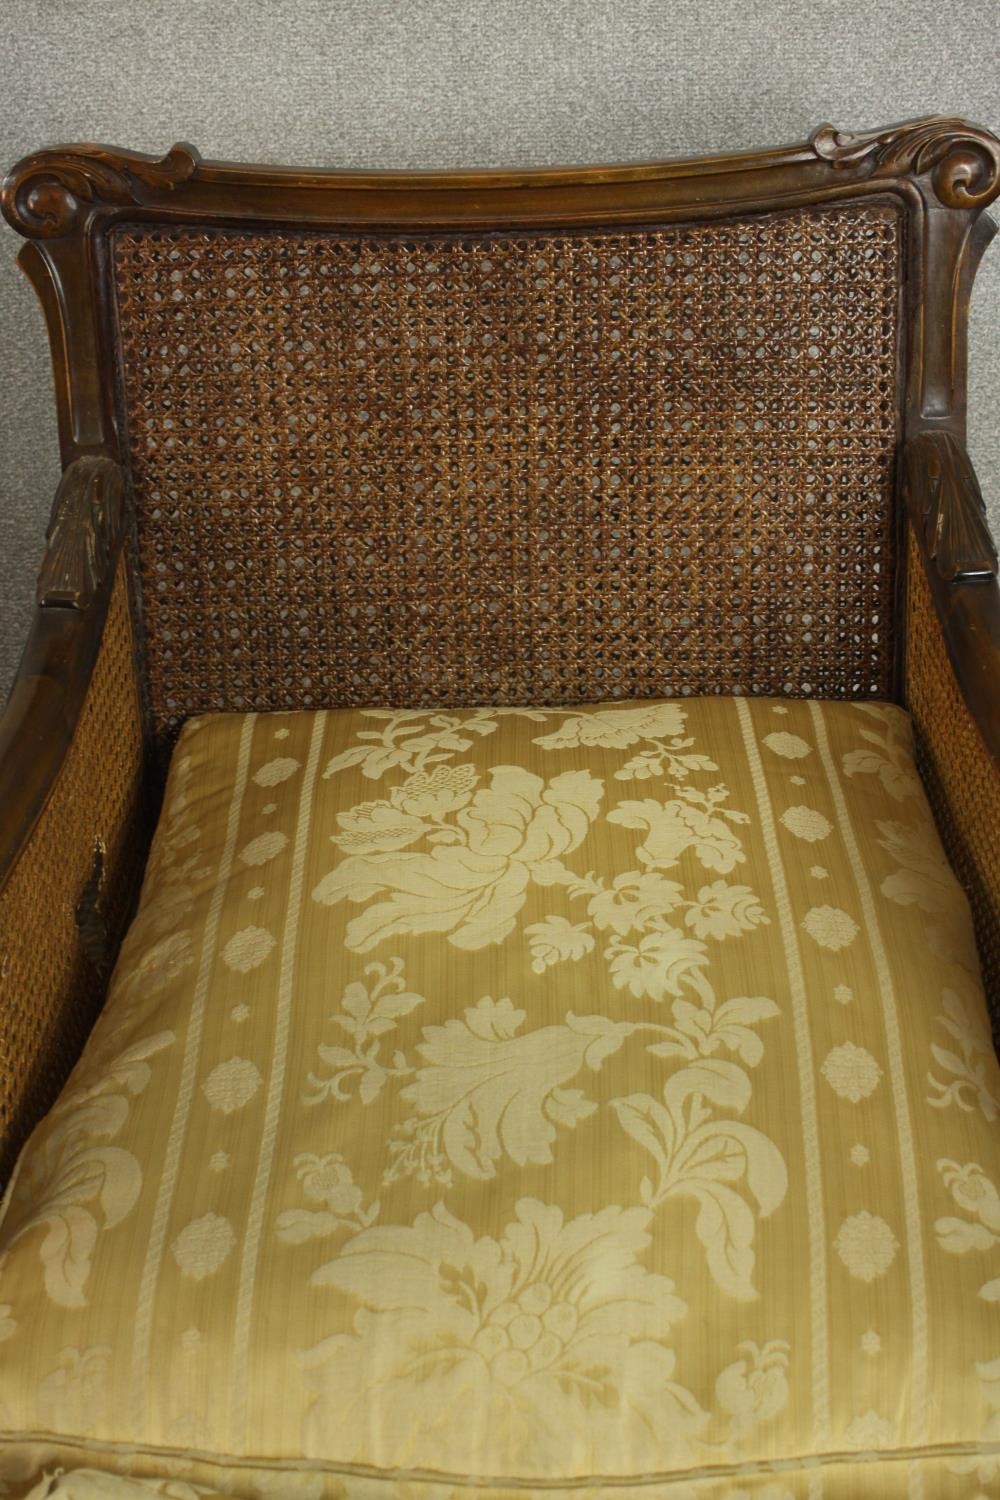 A pair of early 20th century Continental carved walnut bergere armchairs, upholstered in gold - Image 5 of 30